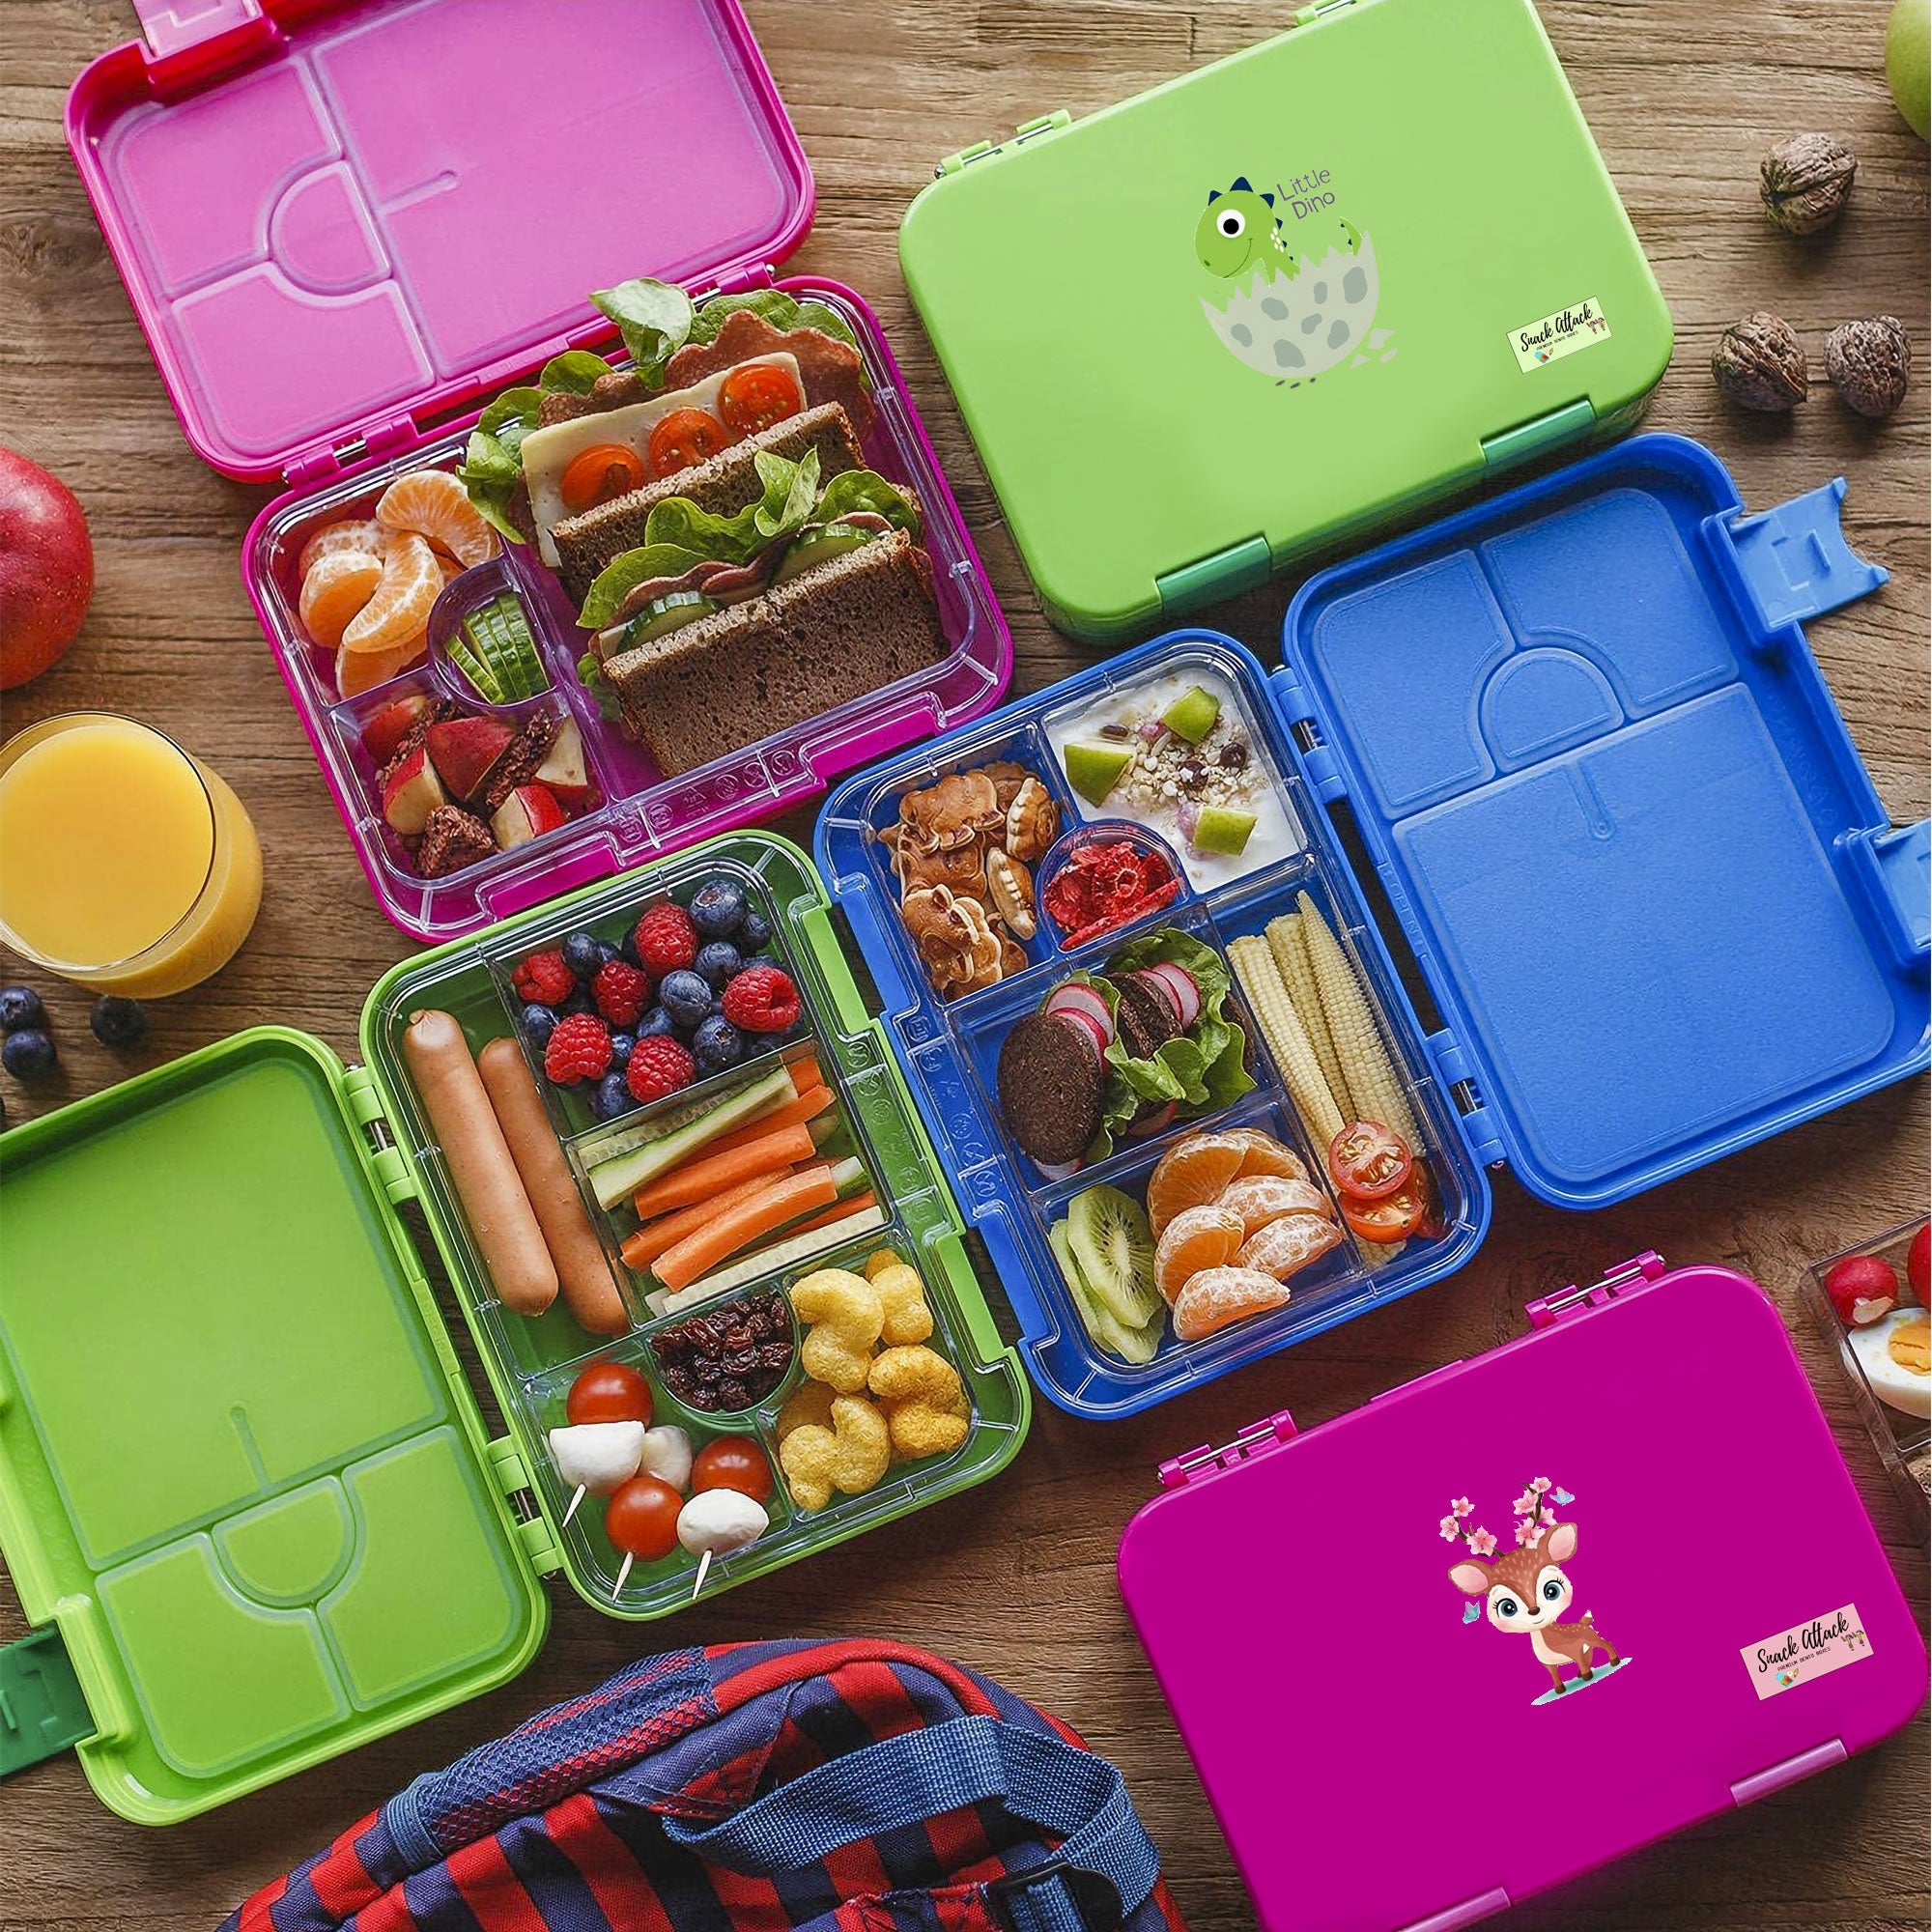 Snack Attack TM Lunch Box Bento style Bunny Shape Purple Color for Kid –